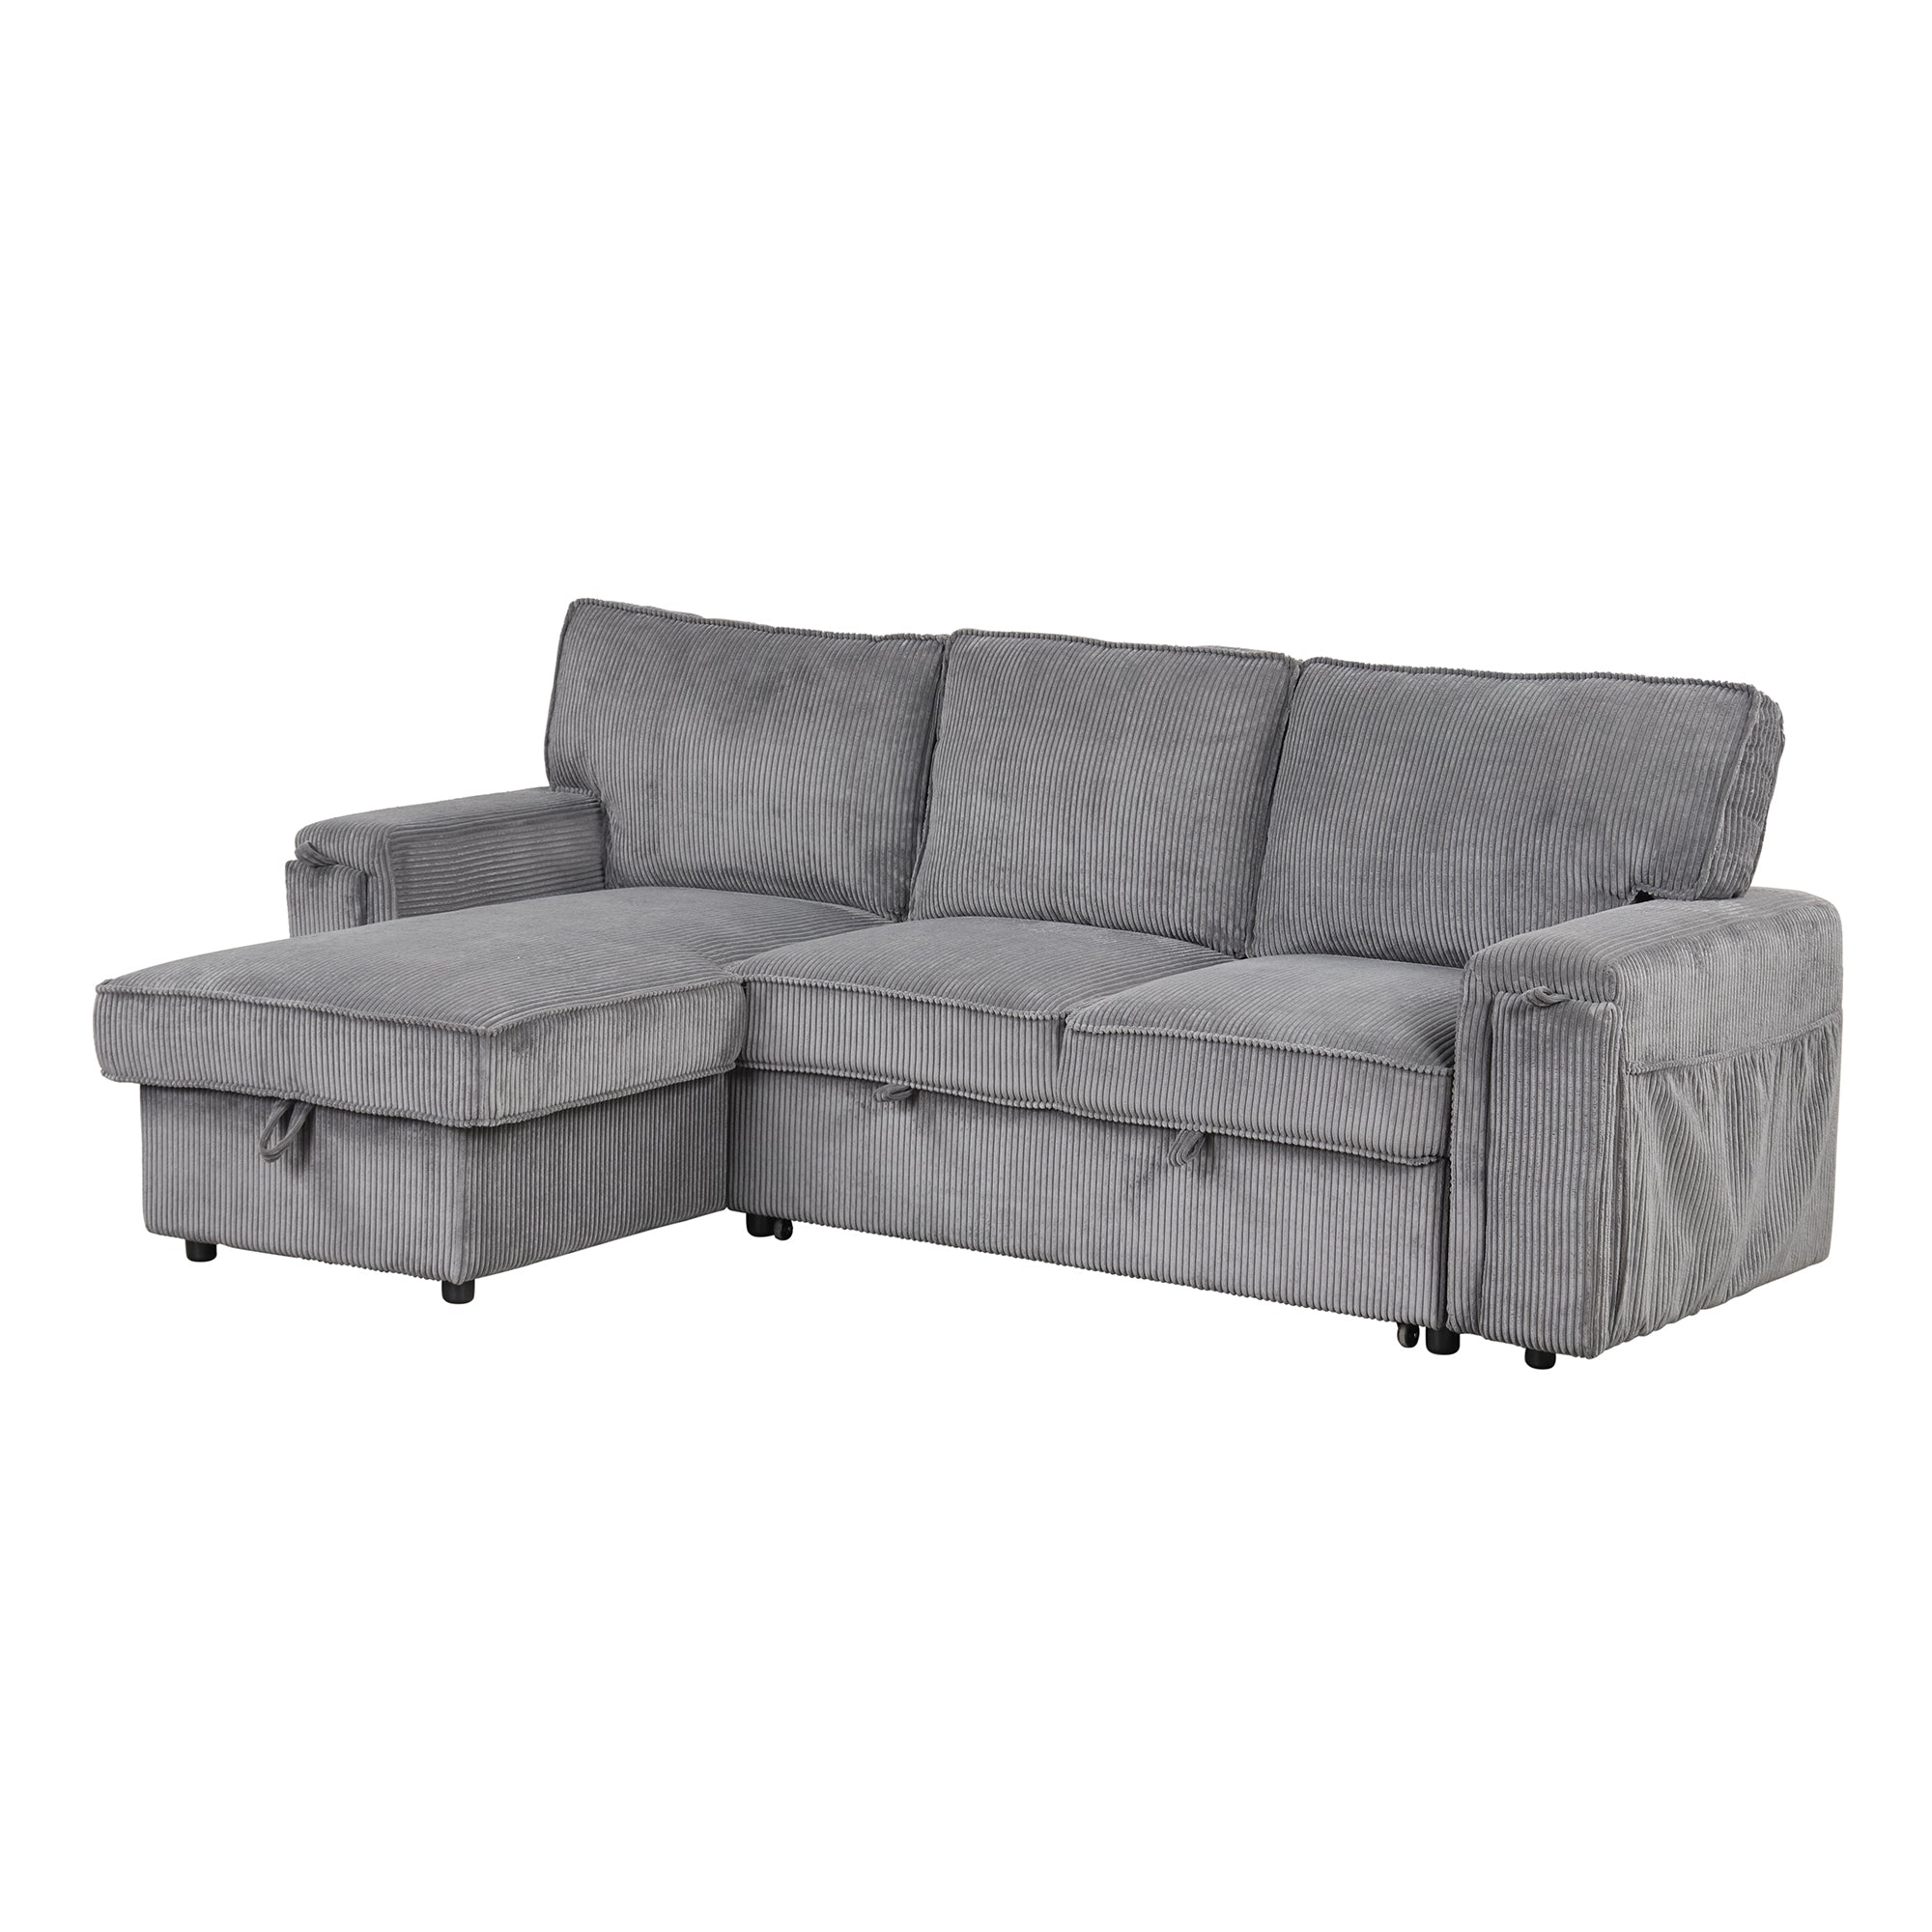 Gray Upholstery Sleeper Sectional Sofa: Storage Bags, 2 Cup Holders-Sleeper Sectionals-American Furniture Outlet